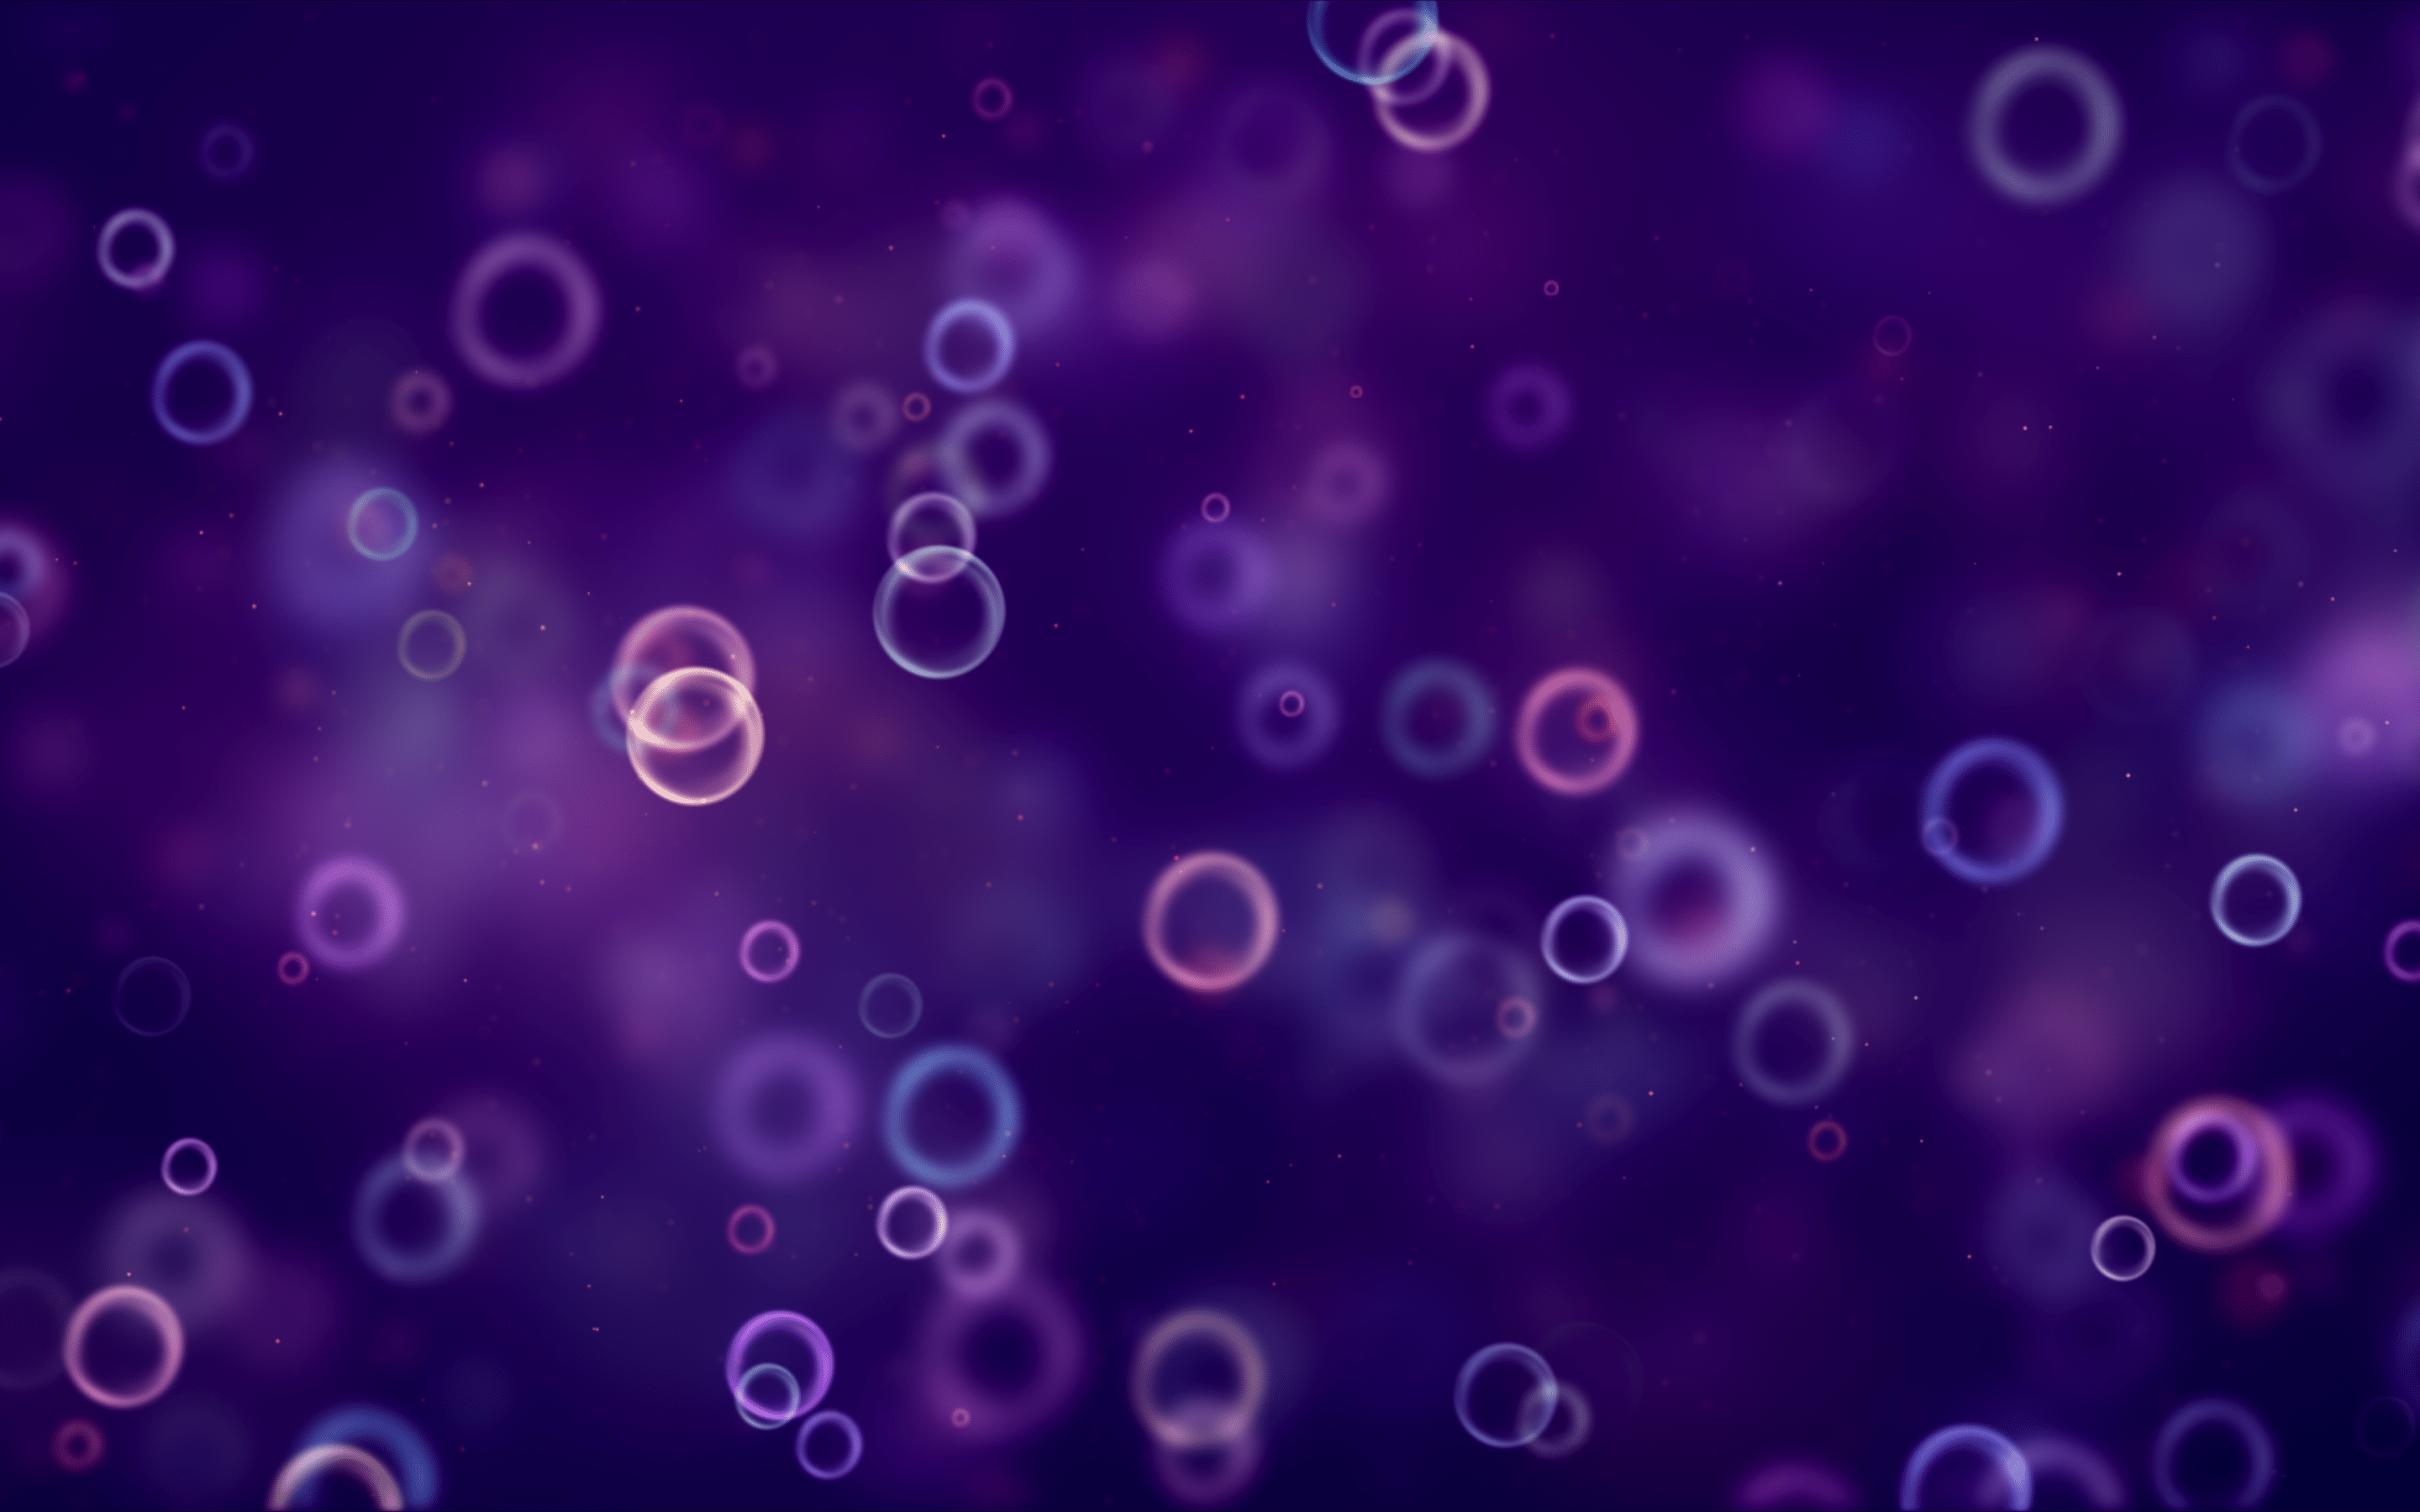 A purple abstract image with floating spheres - Bubbles